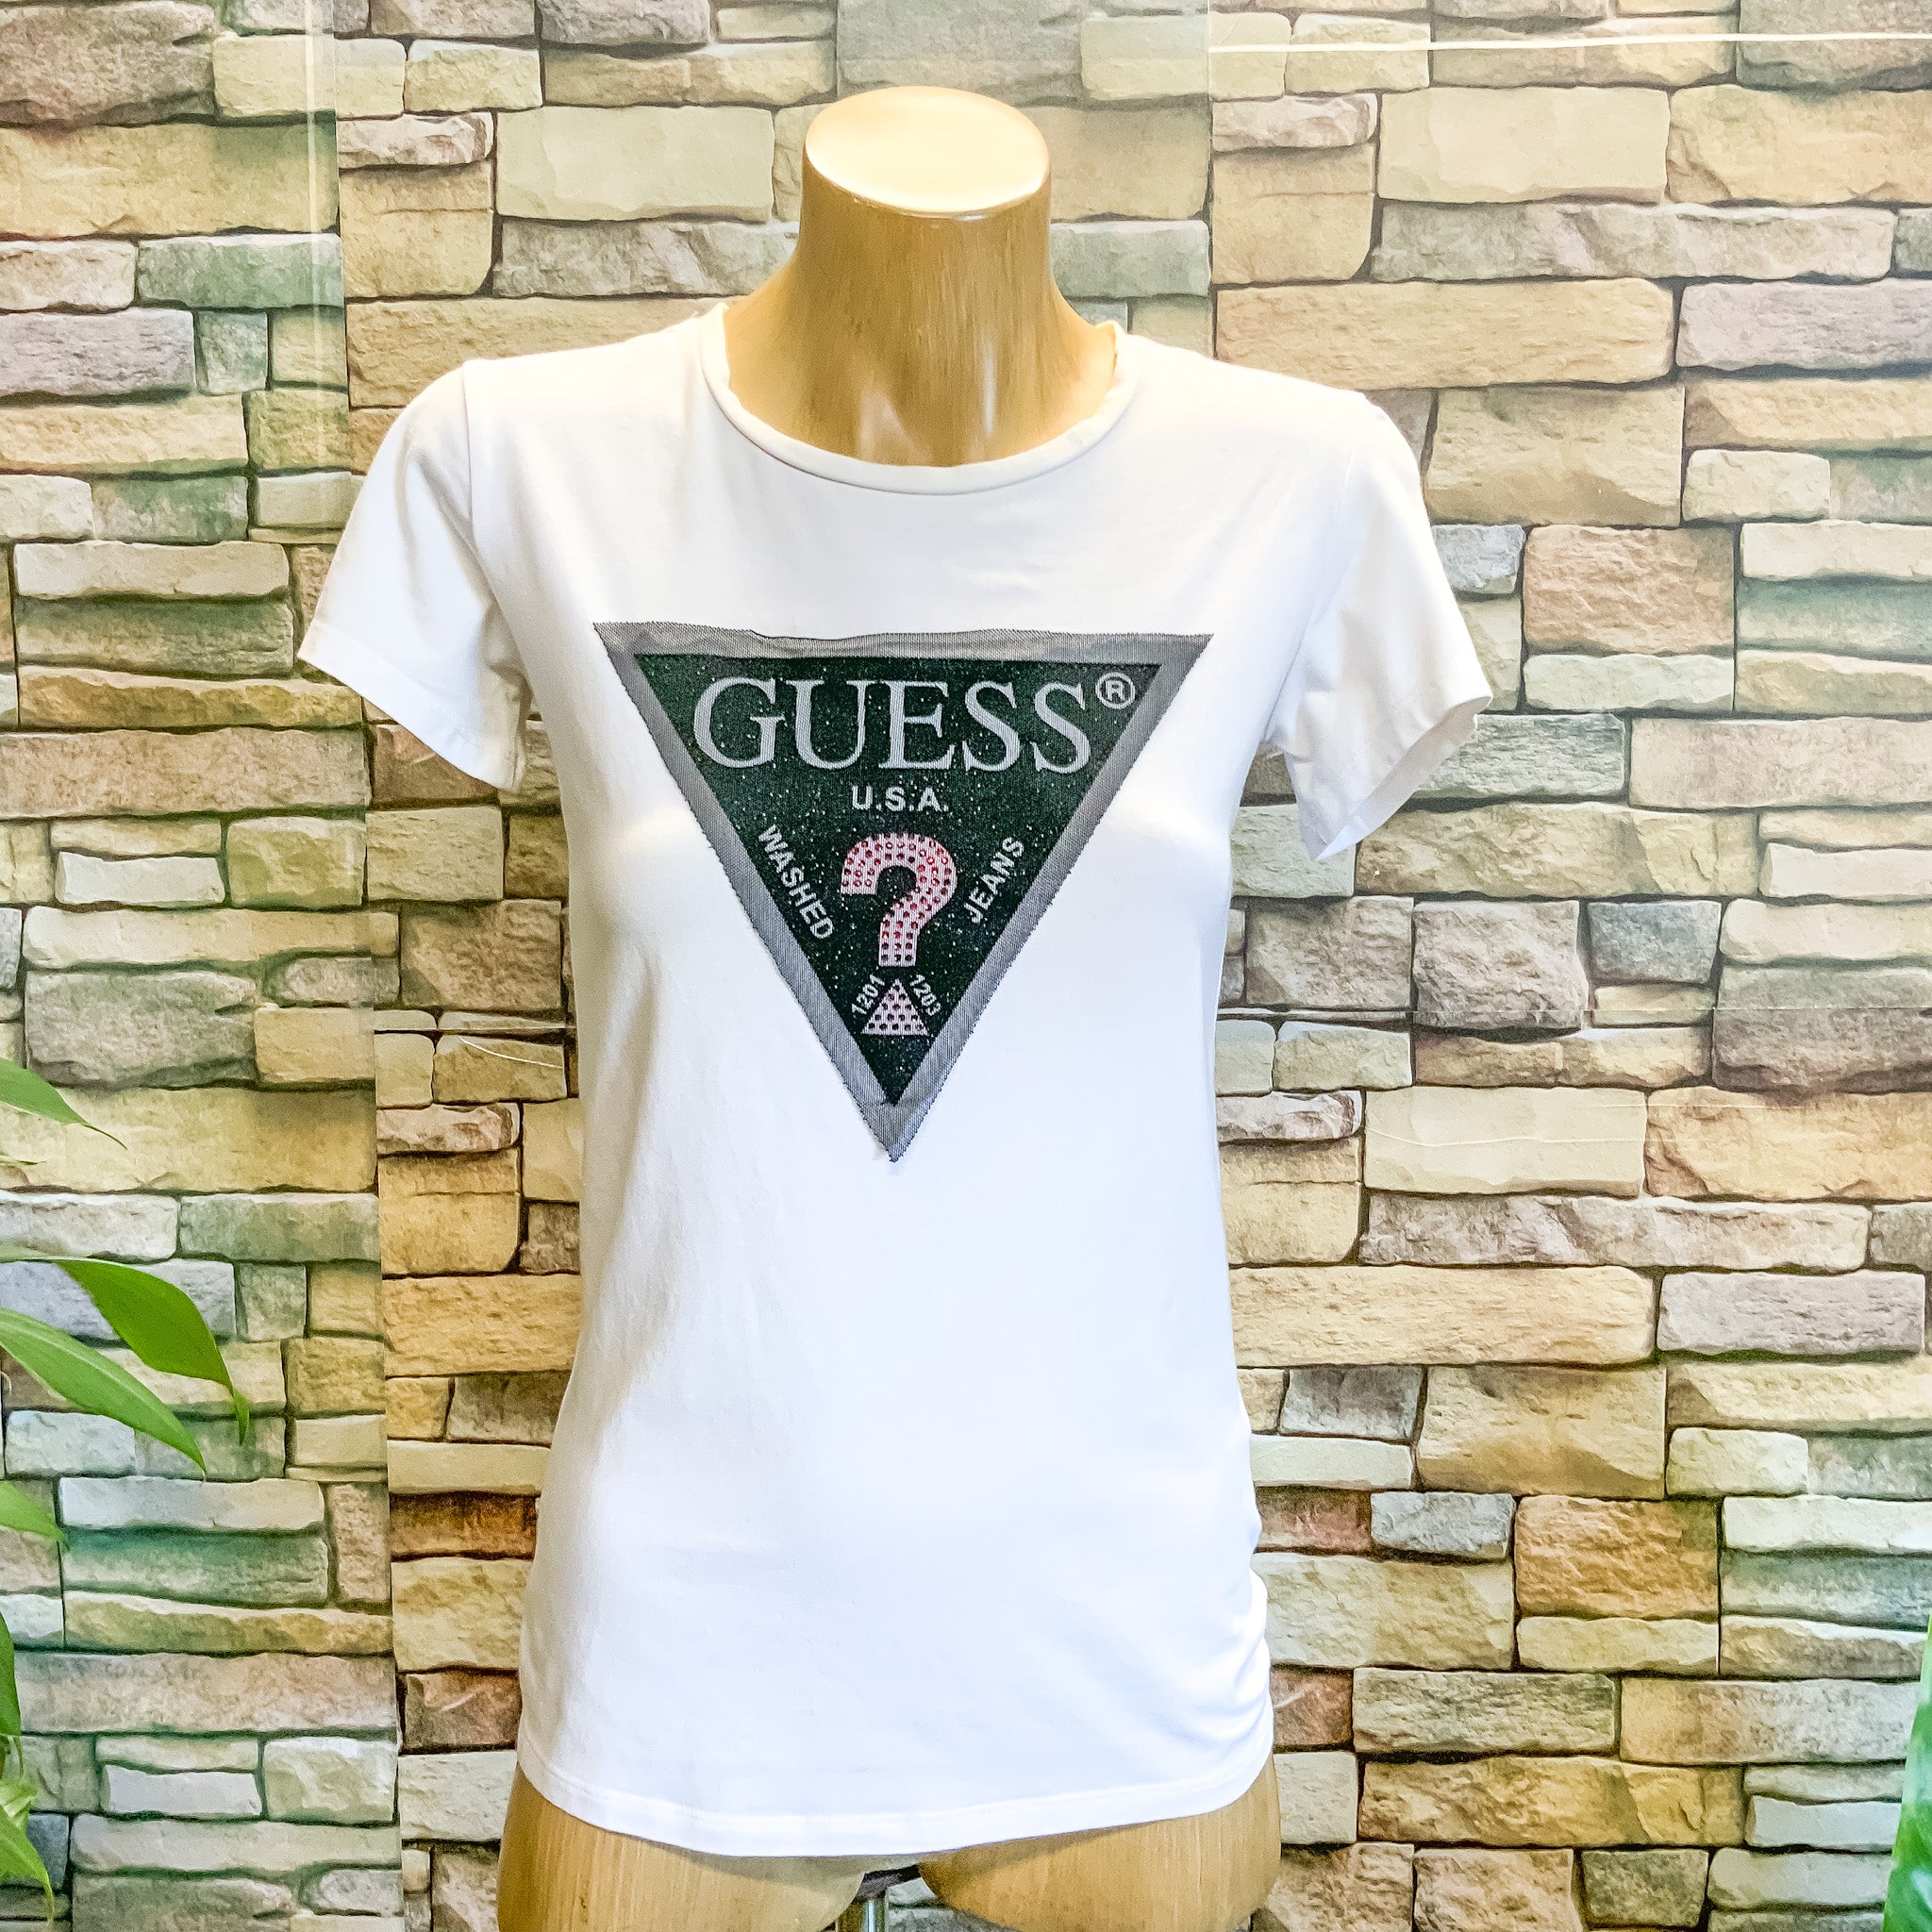 GUESS Womens White Tee with Black Triangle Logo Print - size XS